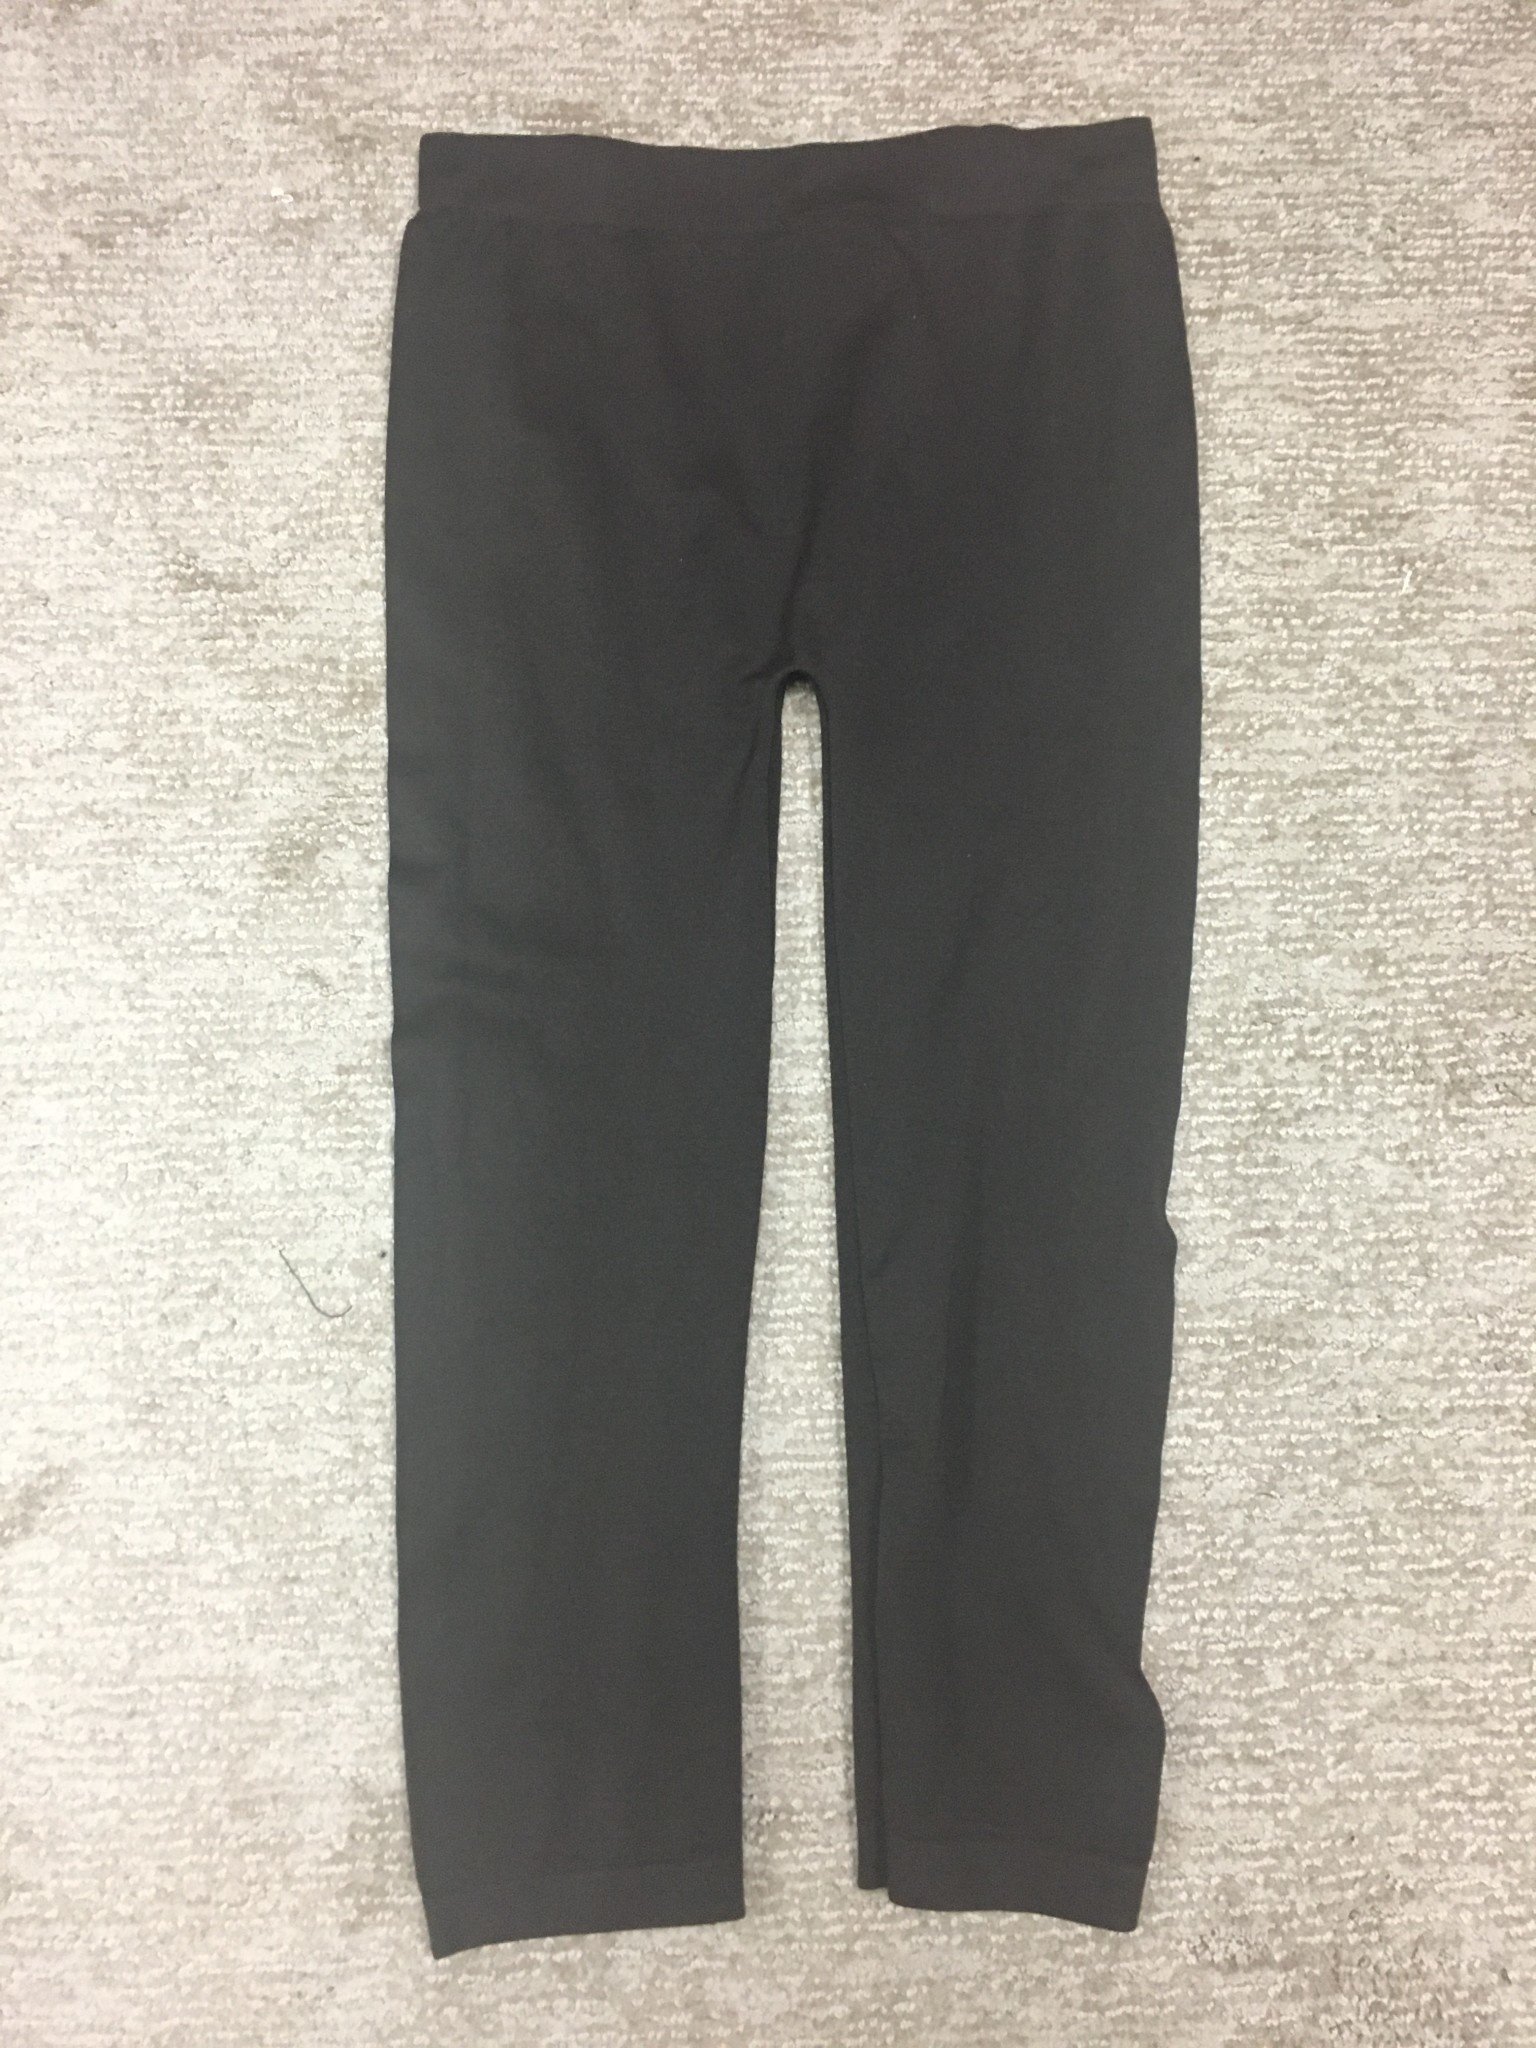 NWT SOFRA Lightweight Polyester 90% Spandex 10% Leggings FREE SIZE